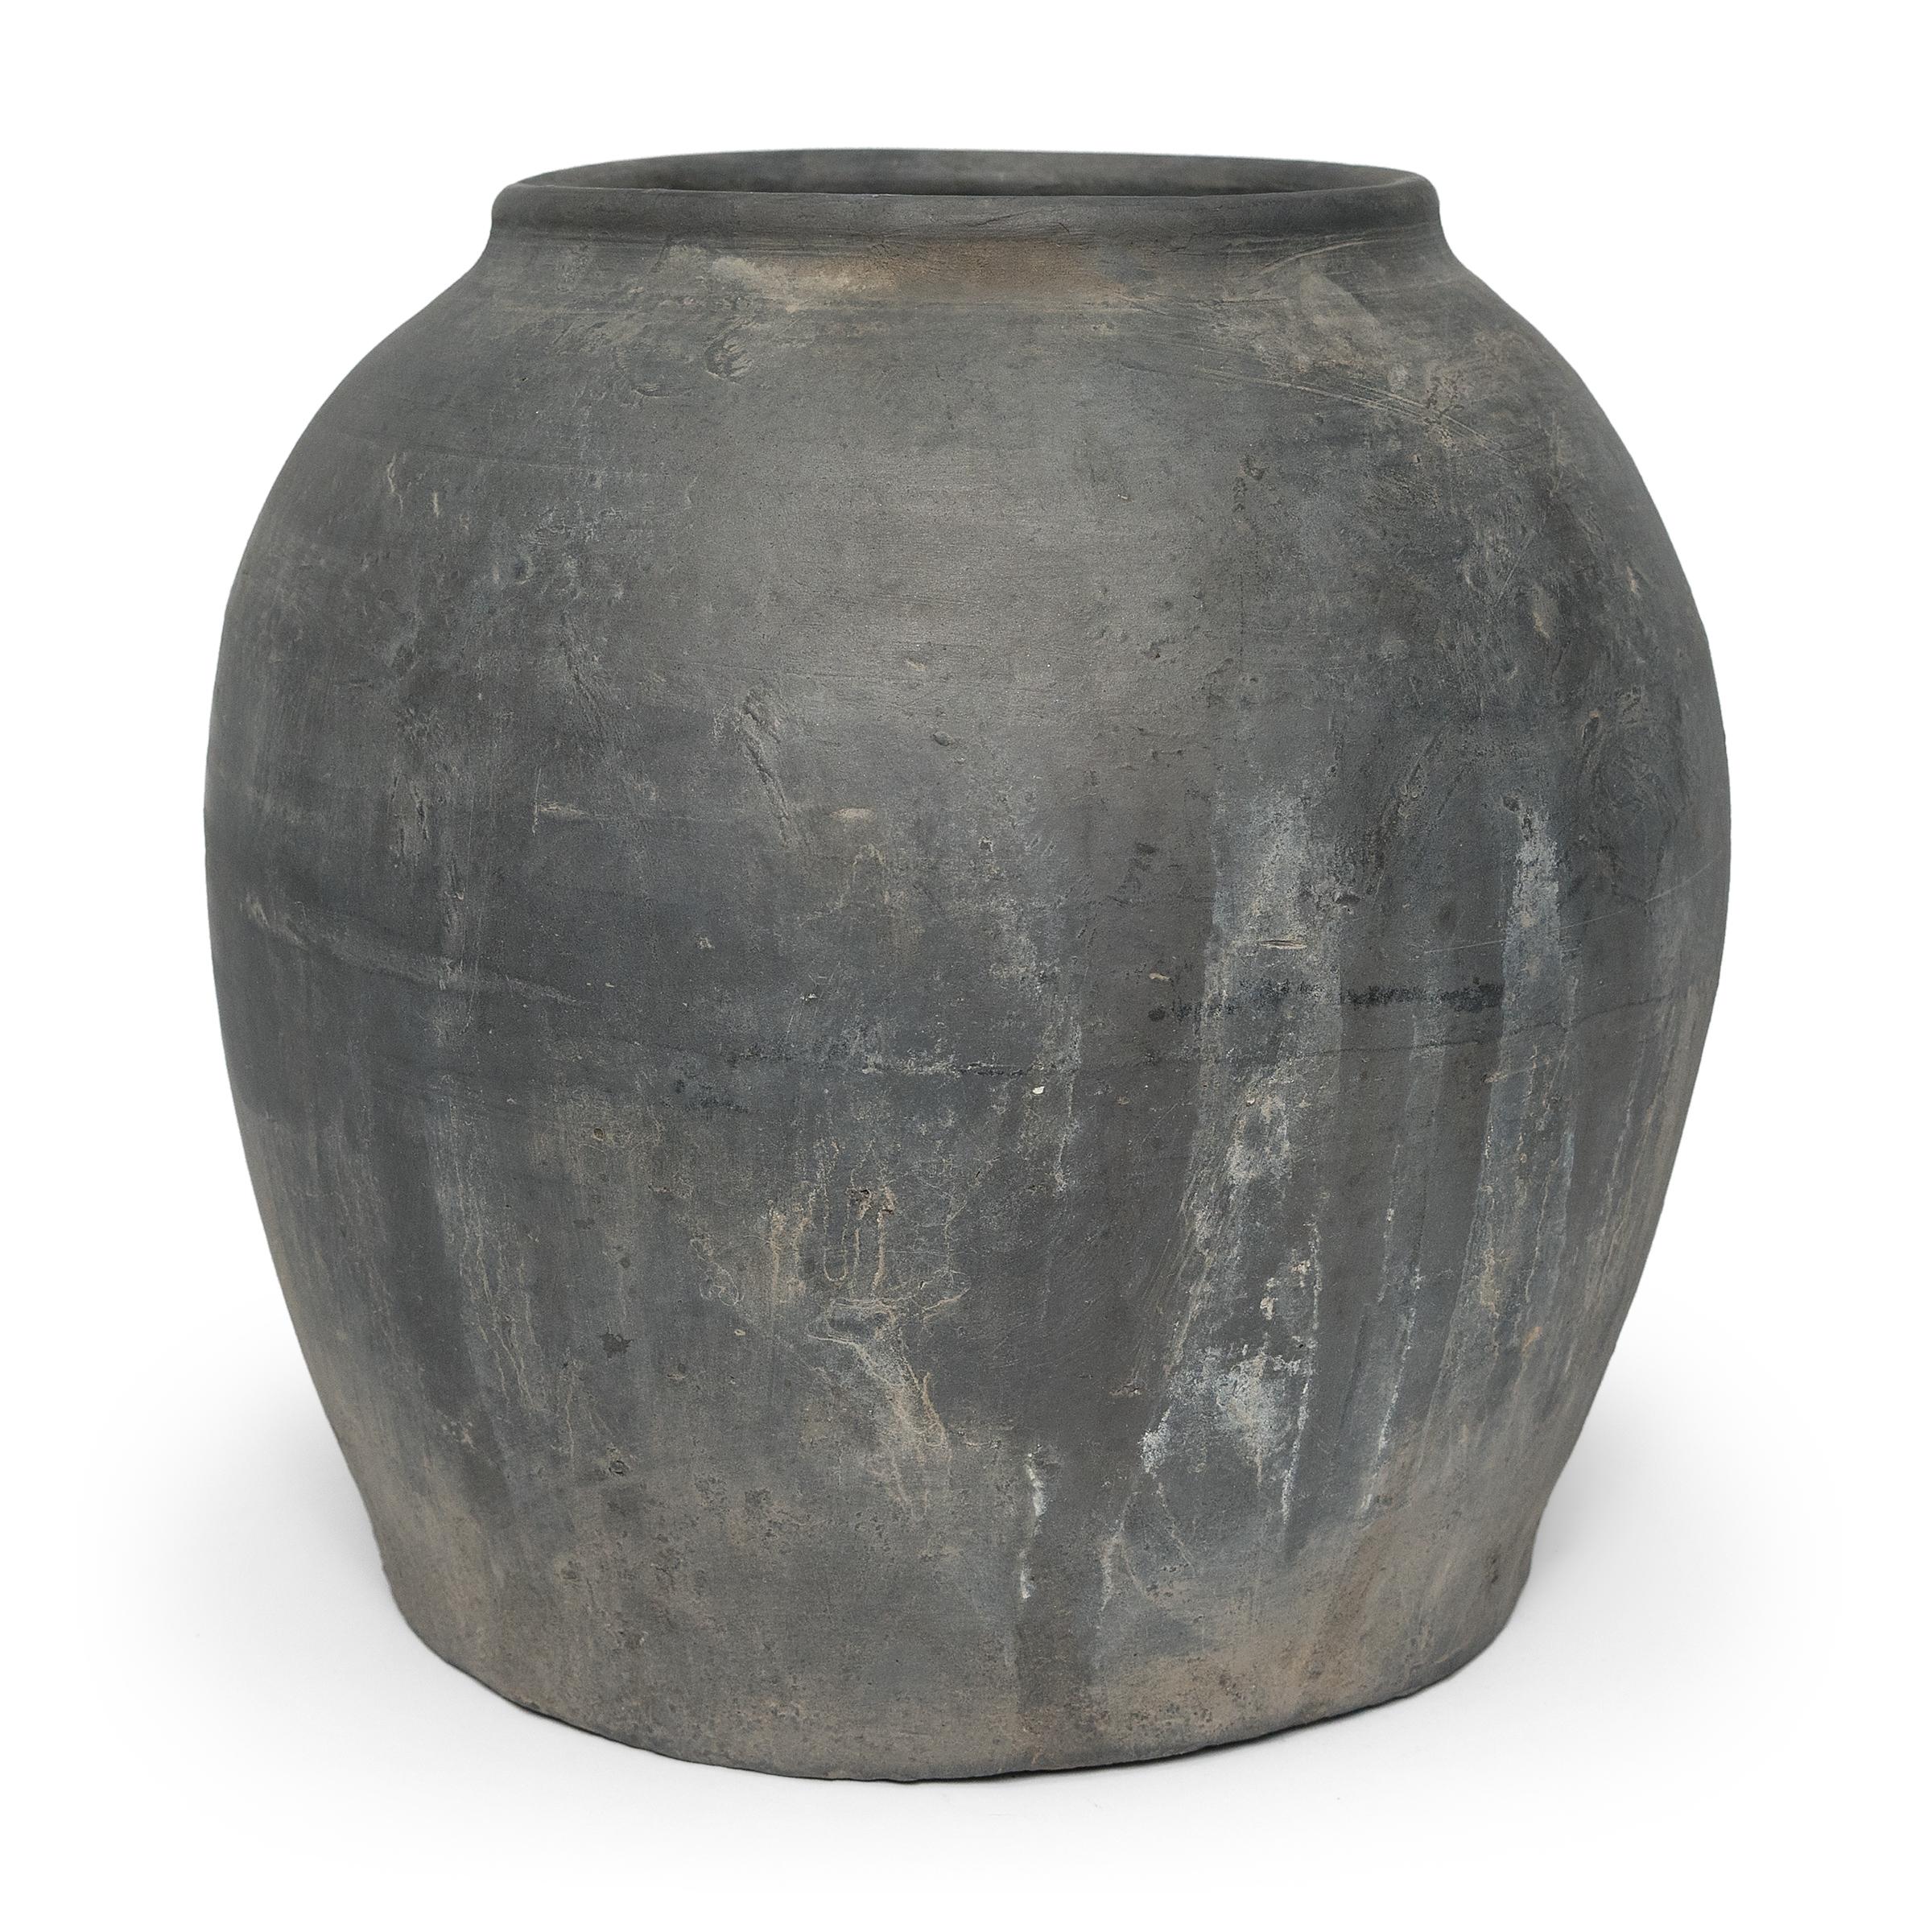 Sculpted during the early 20th century in China's Shanxi province, this vessel has a smokey grey exterior with balanced proportions and a beautifully irregular unglazed surface. Charged with the humble task of storing dry goods, this earthenware jar